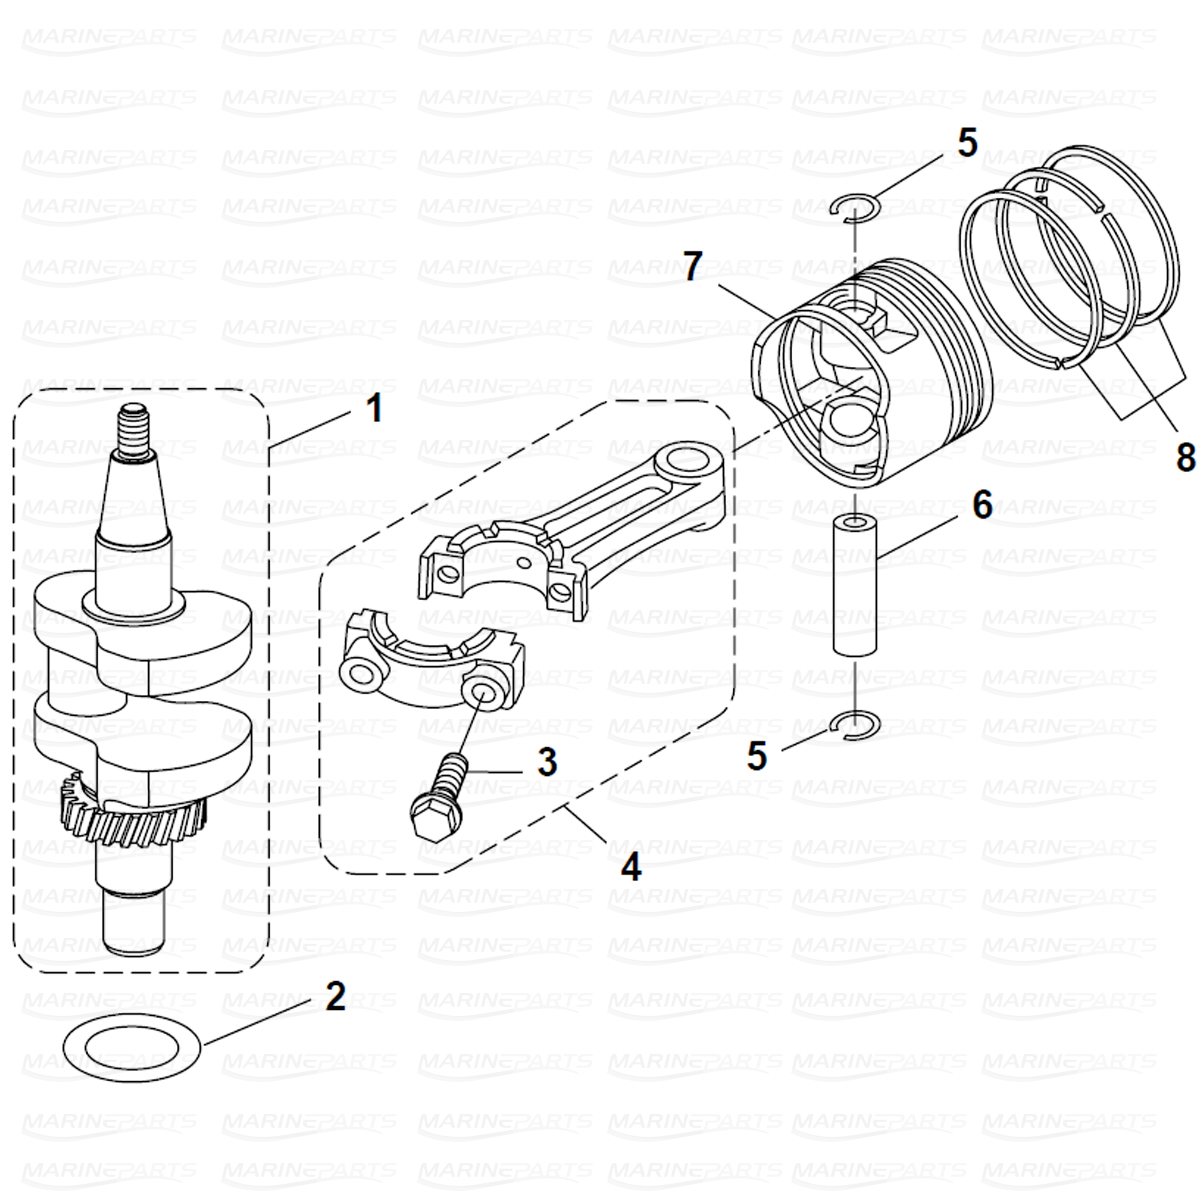 Exploded view crankshaft and piston, Parsun 6 hp